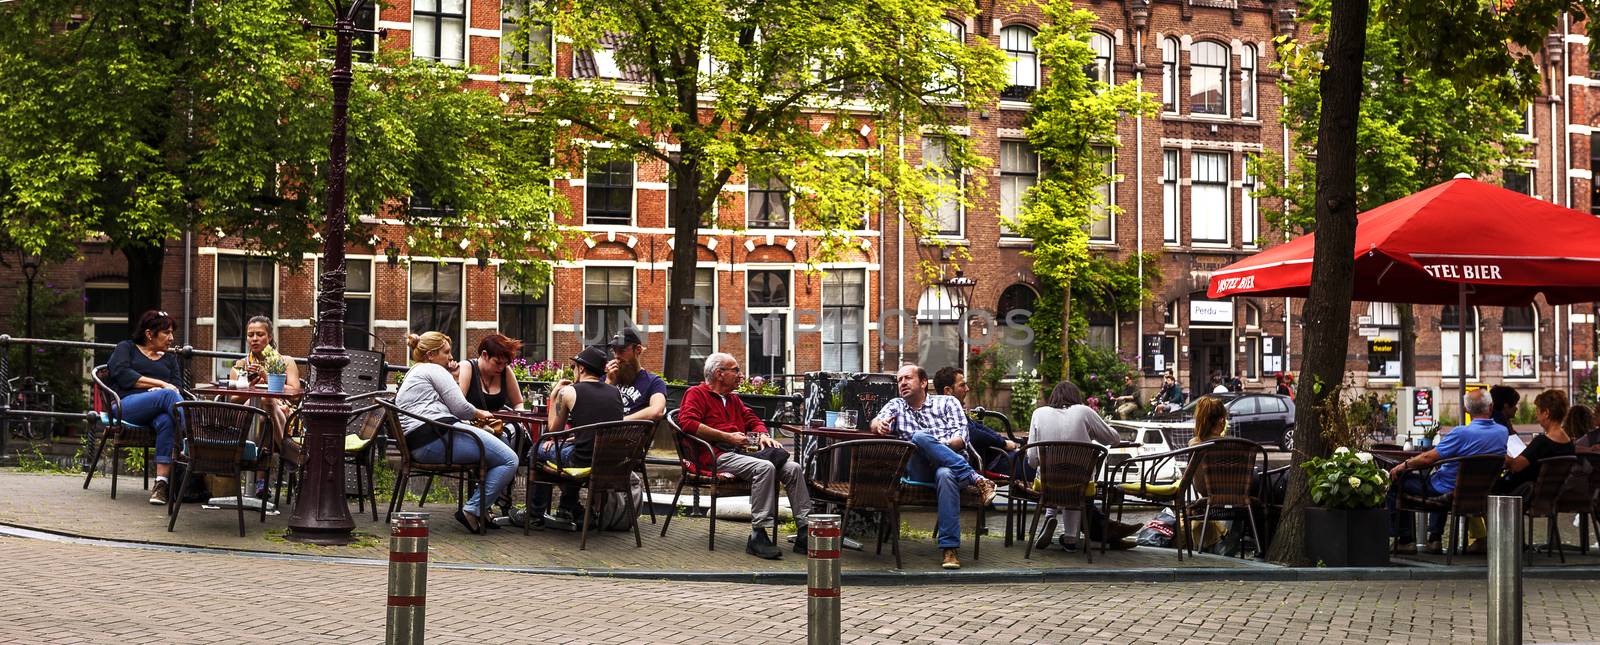 AMSTERDAM, NETHERLANDS, JULY 9  2016. People is relaxing and have a drink on a terrace along the canal in Amsterdam, style of life in Amsterdam, Netherlands.